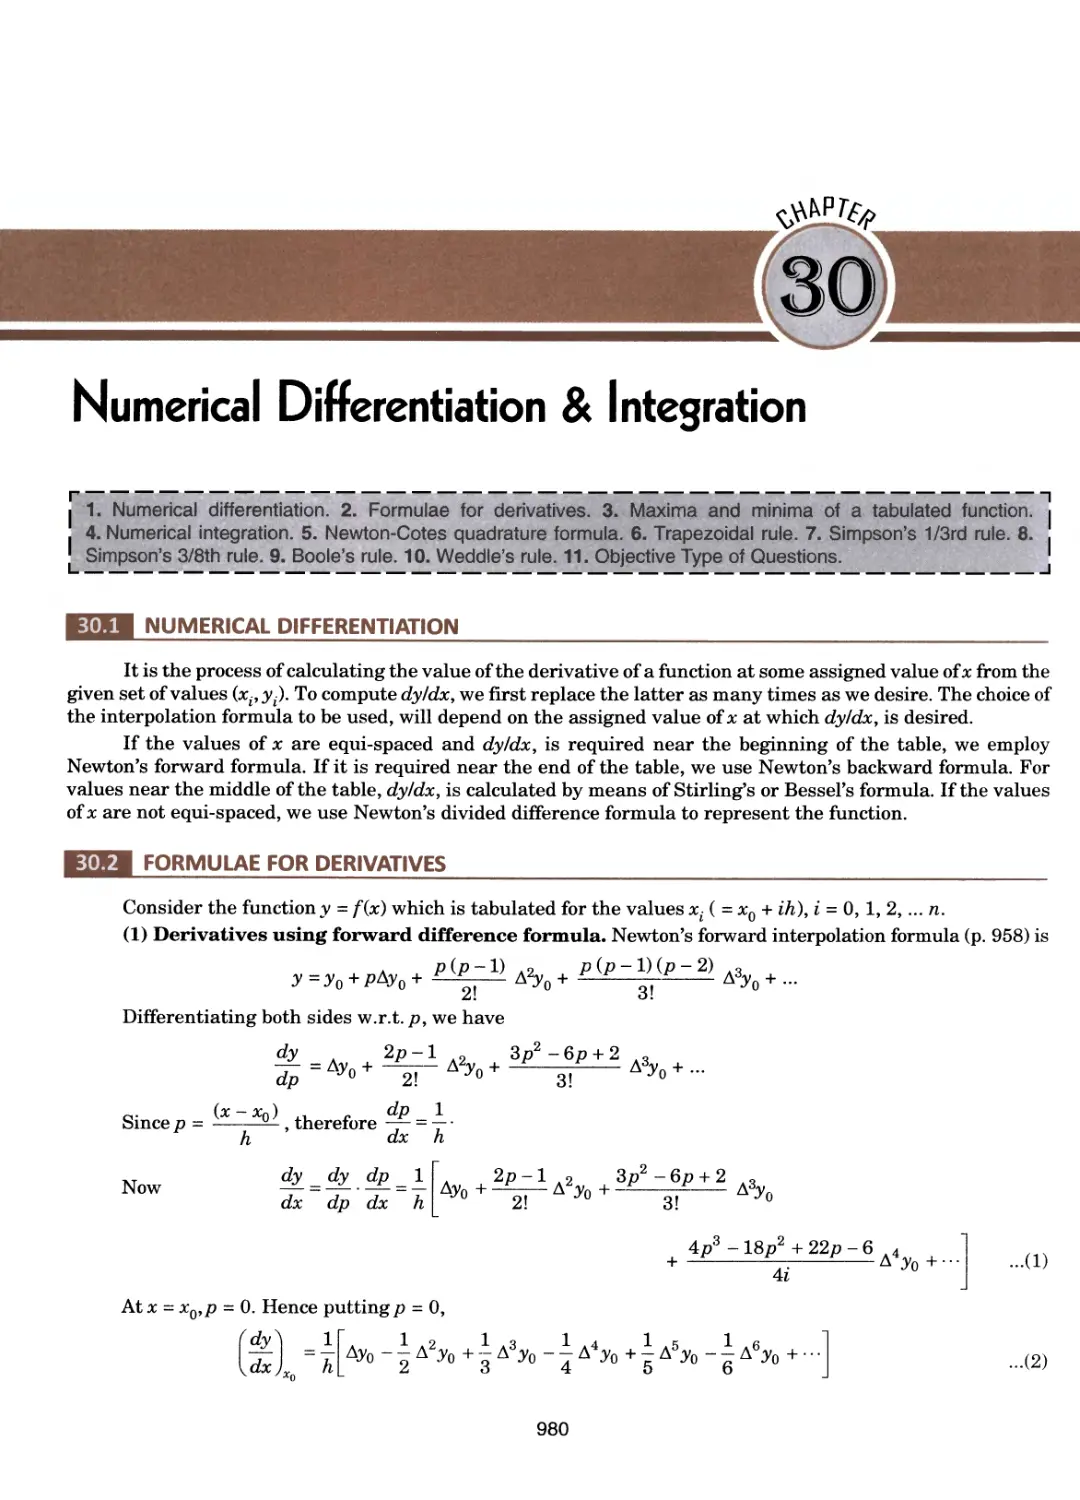 30.Numerical Differentiation and Integration 980